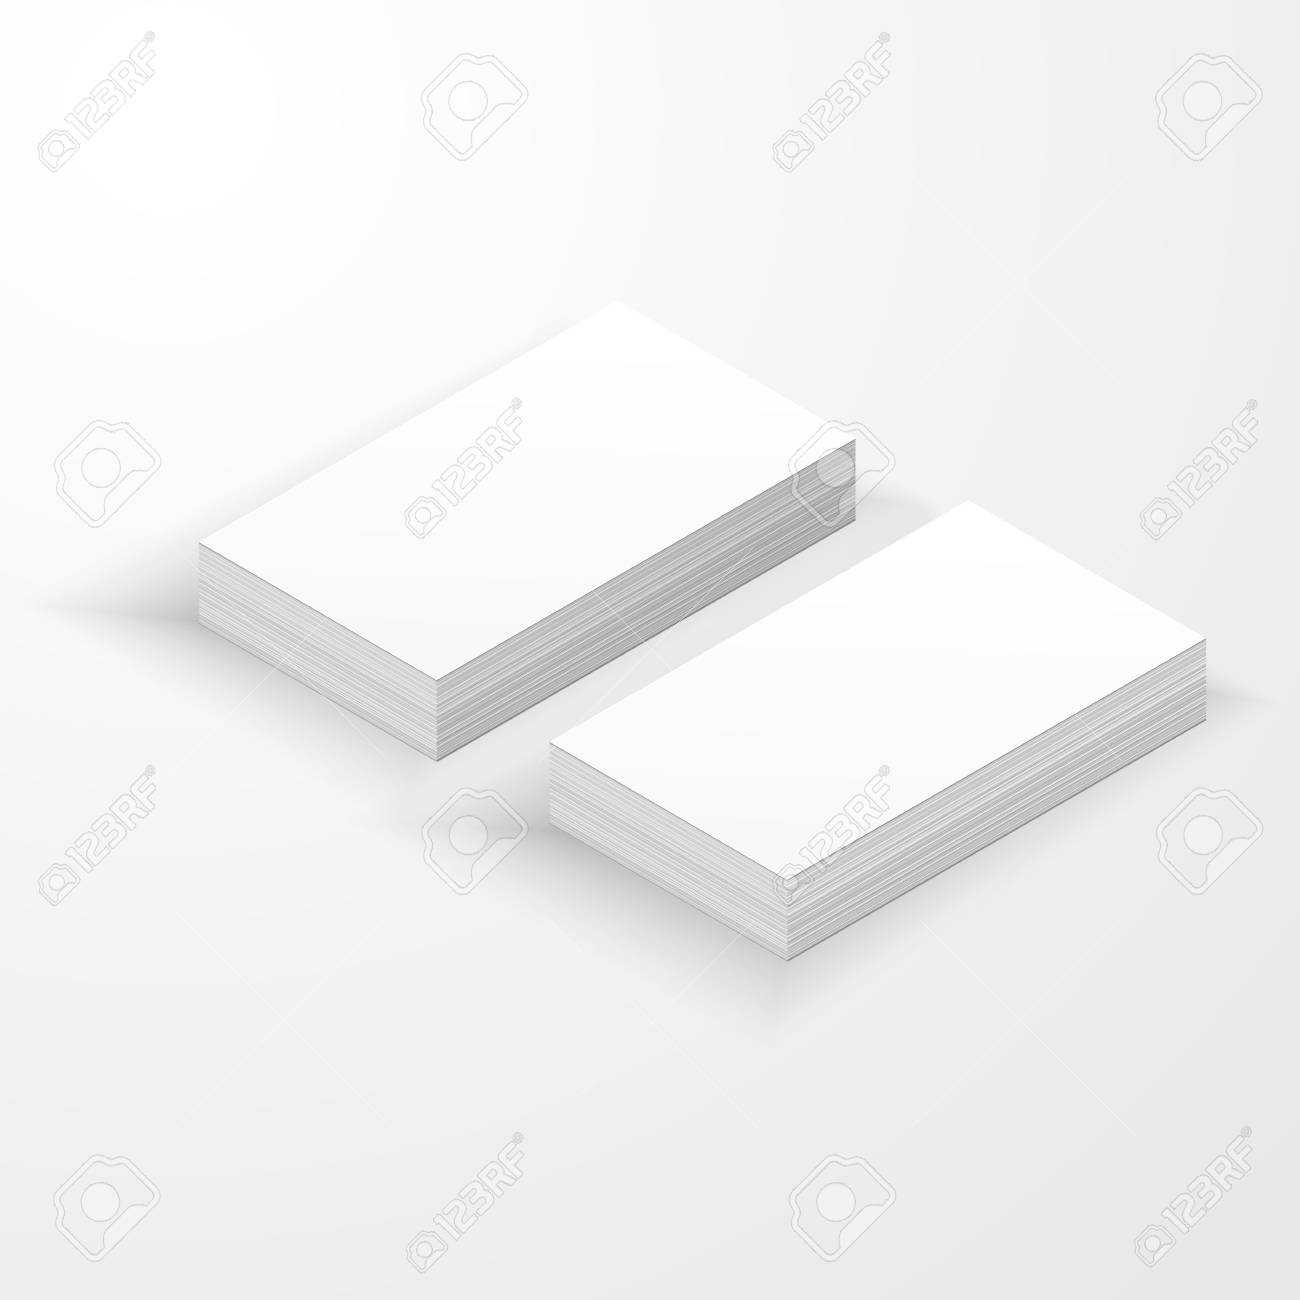 Blank Business Card Mockup Template Createdvector. In Plain Business Card Template